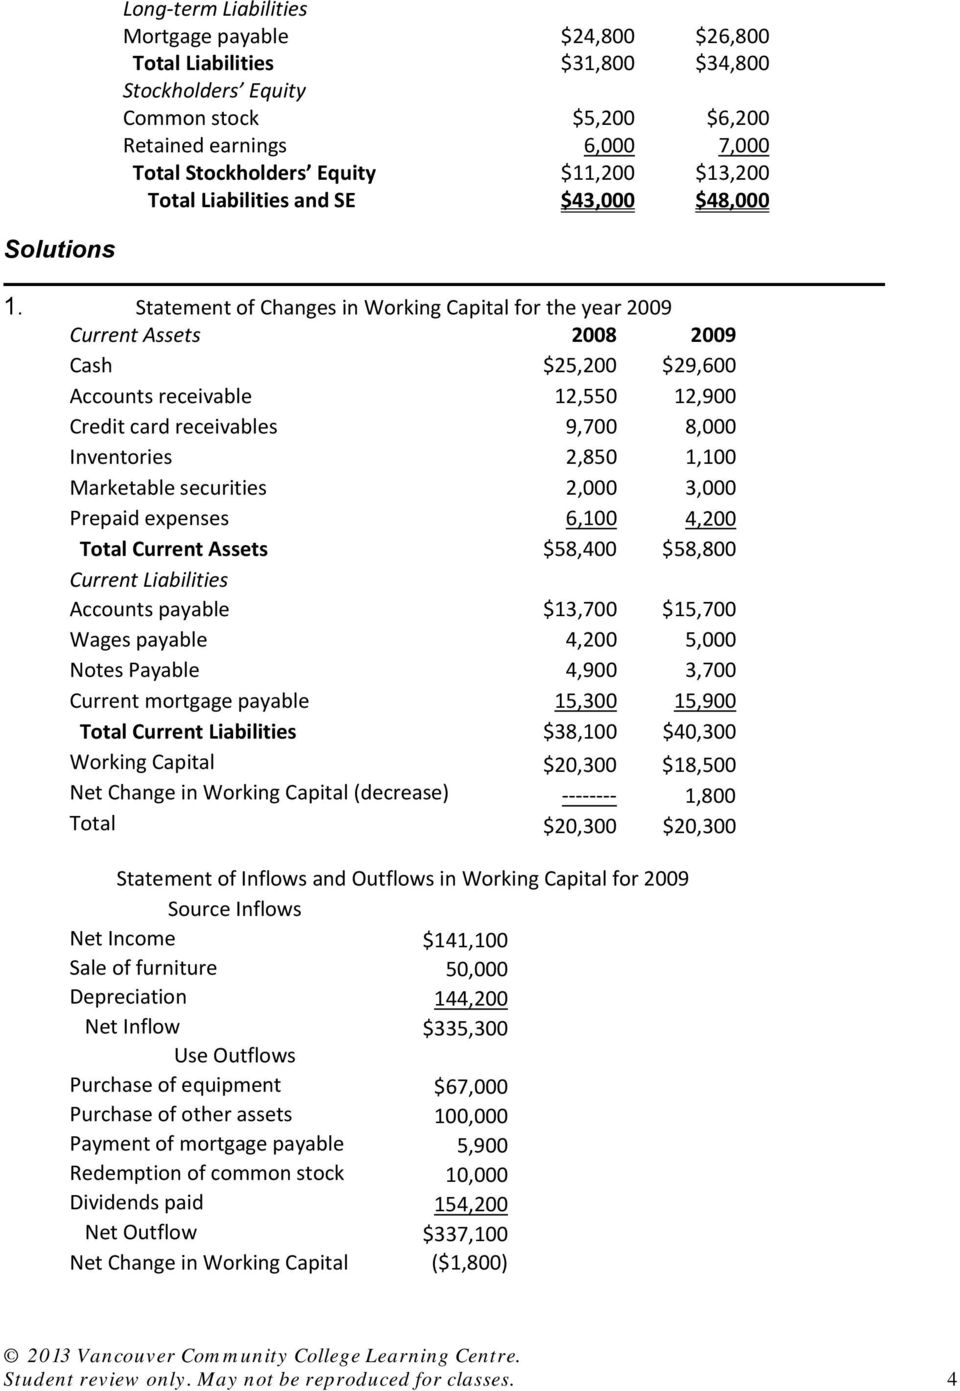 Statement of Changes in Working Capital for the year 2009 2008 2009 Cash $25,200 $29,600 Accounts receivable 12,550 12,900 Credit card receivables 9,700 8,000 Inventories 2,850 1,100 Marketable